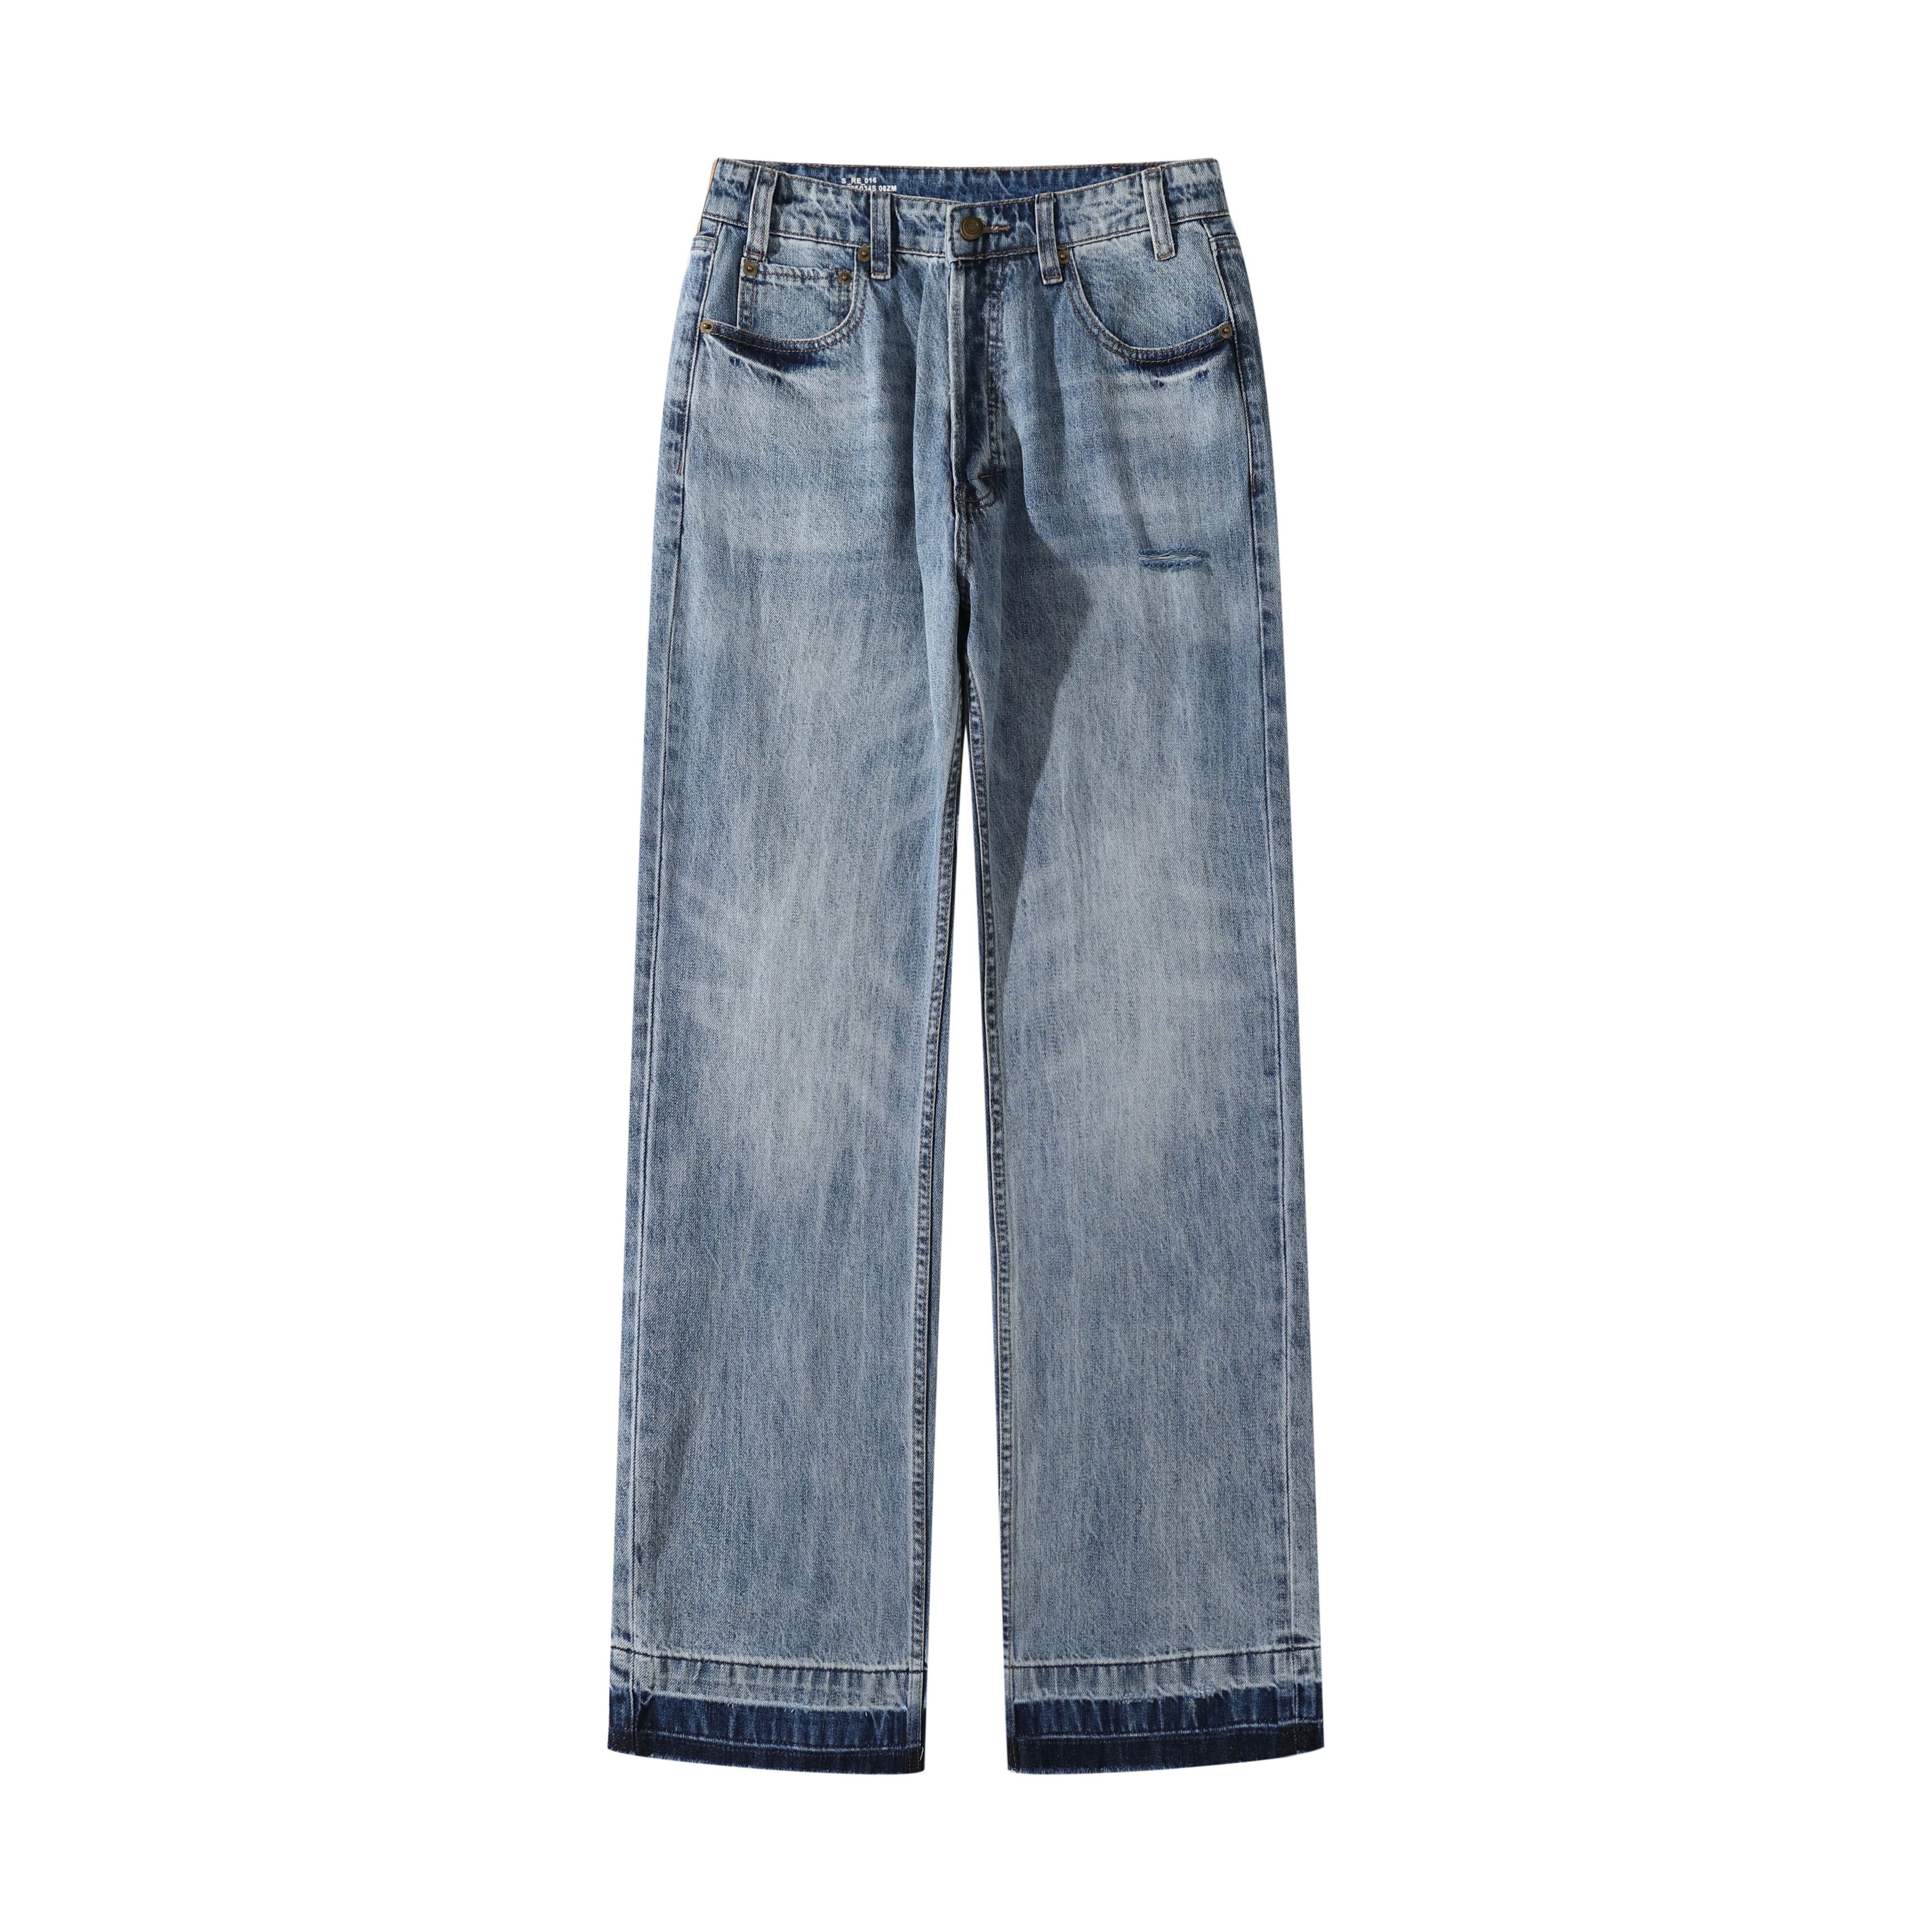 'Faded Blue' Jeans - Santo 